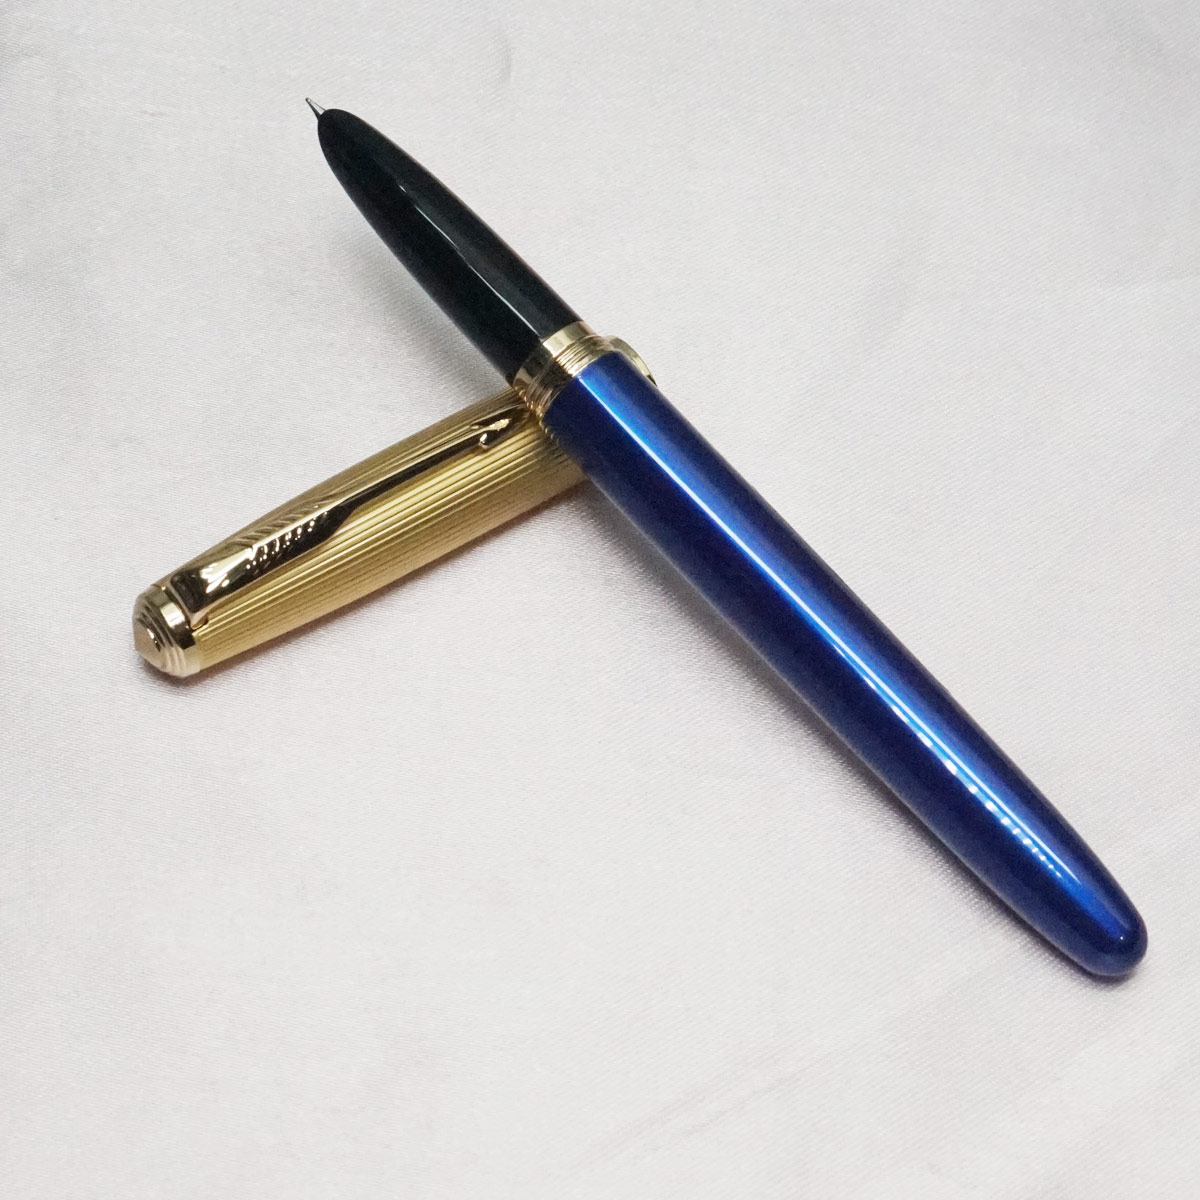 Jinhao 51  Gold Cap with Lines and Blue Color Body No.51 SSF Nib Eye Dropper amd Convertor type fountain Pen SKU 21991